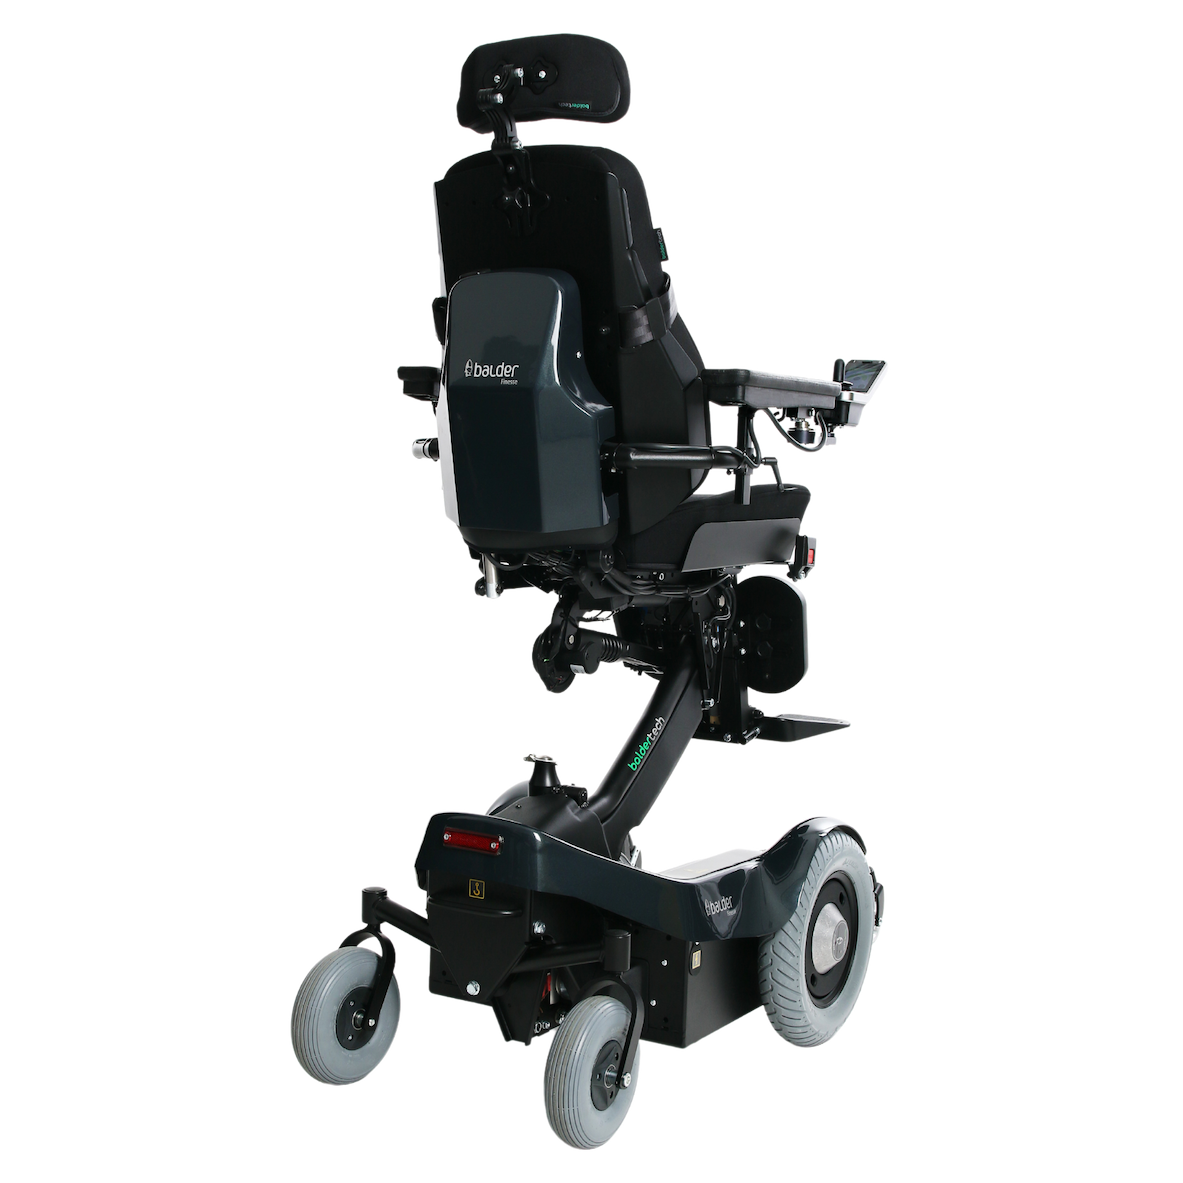 Balder Finesse F390 - A standing powerchair shown in an elevated seated position. 